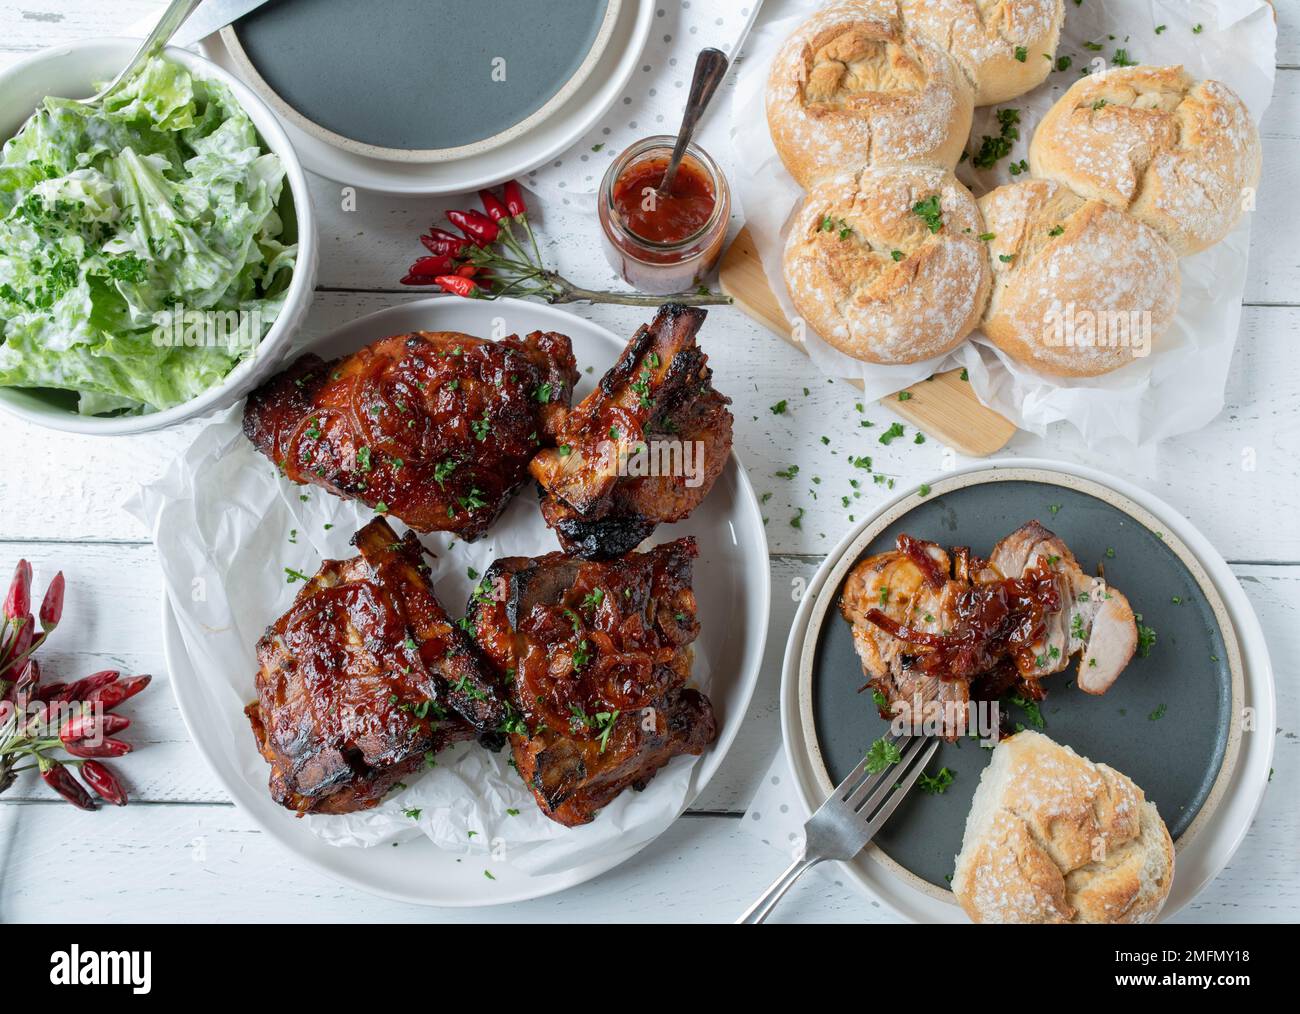 Thick pork ribs with homemade barbecue sauce, salad and bread wreath. Delicious barbecue meal Stock Photo